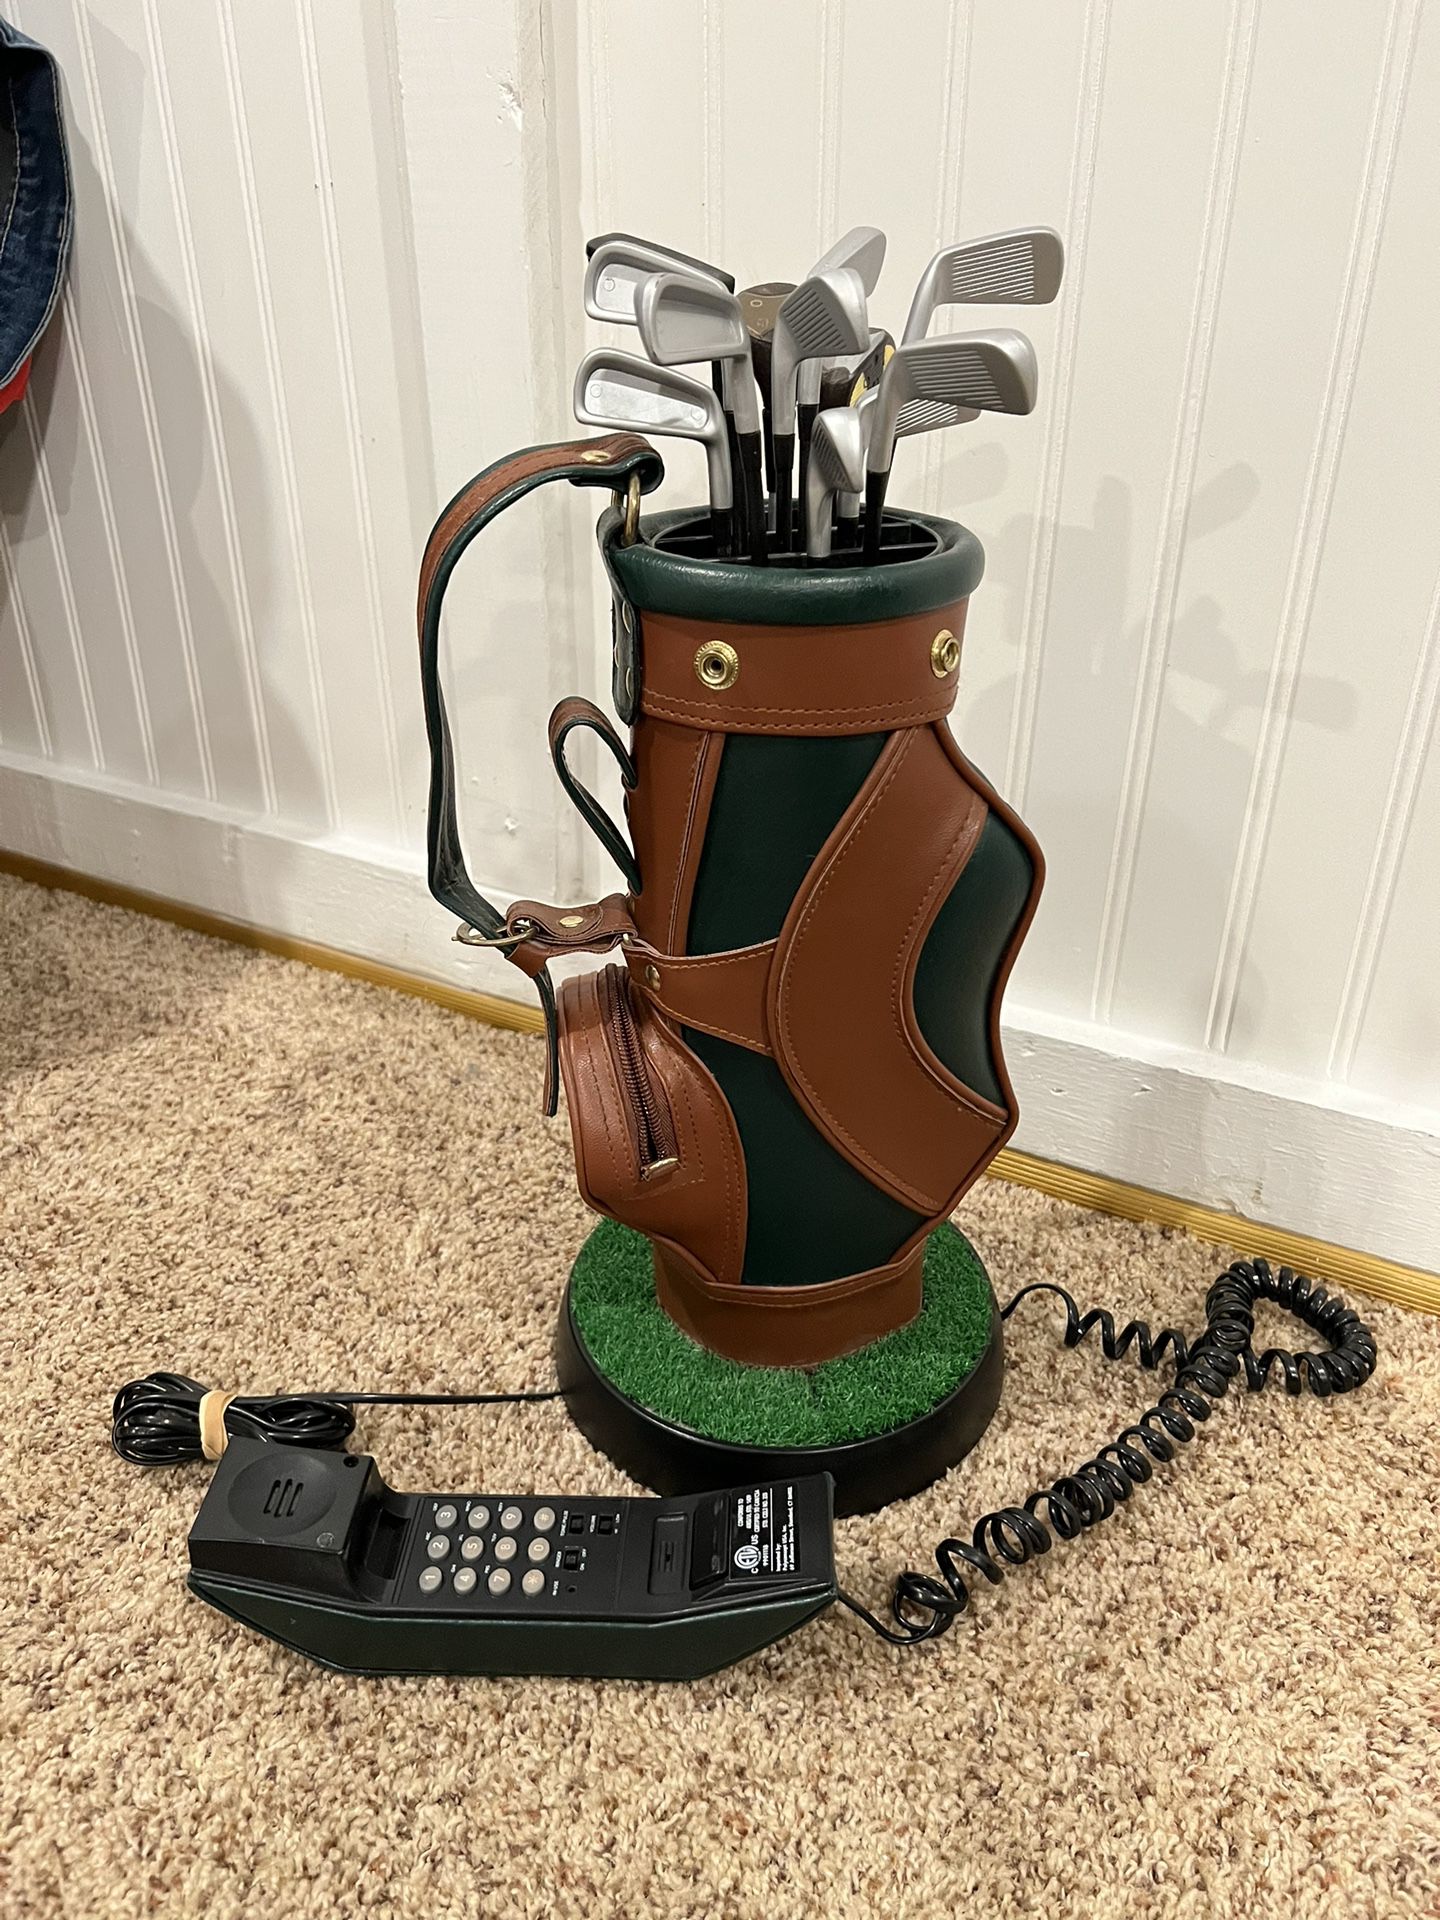 Vintage A Hole In One Golf Bag Phone, Golf Themed Landline Phone, Vintage Golf Bag Landline Phone, Golf Bag Shaped Phone, Gift for Golfers